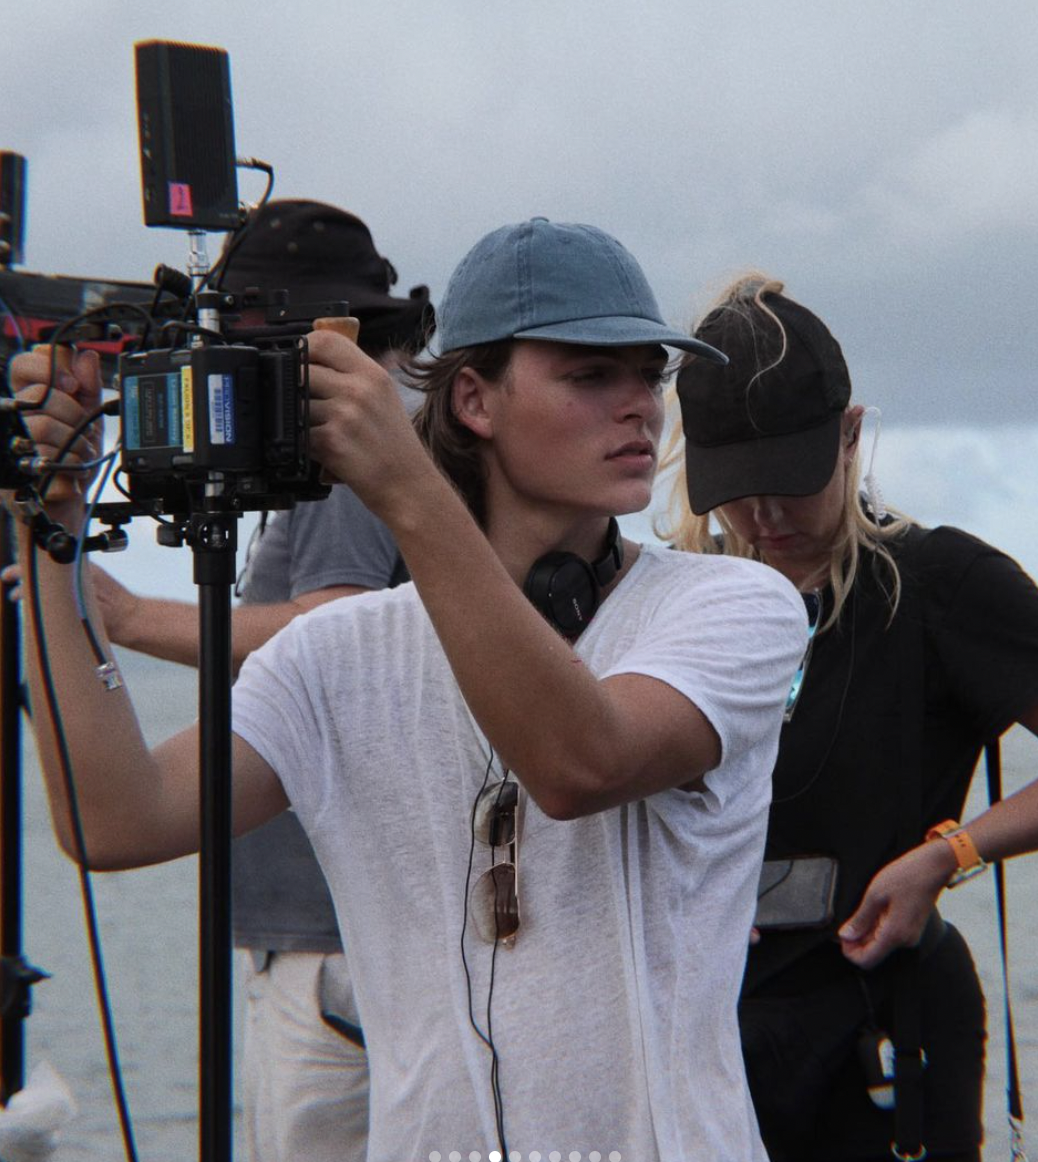 Damian Hurley directing by the beach, dated November 2022 | Source: Instagram/DamienHurley1